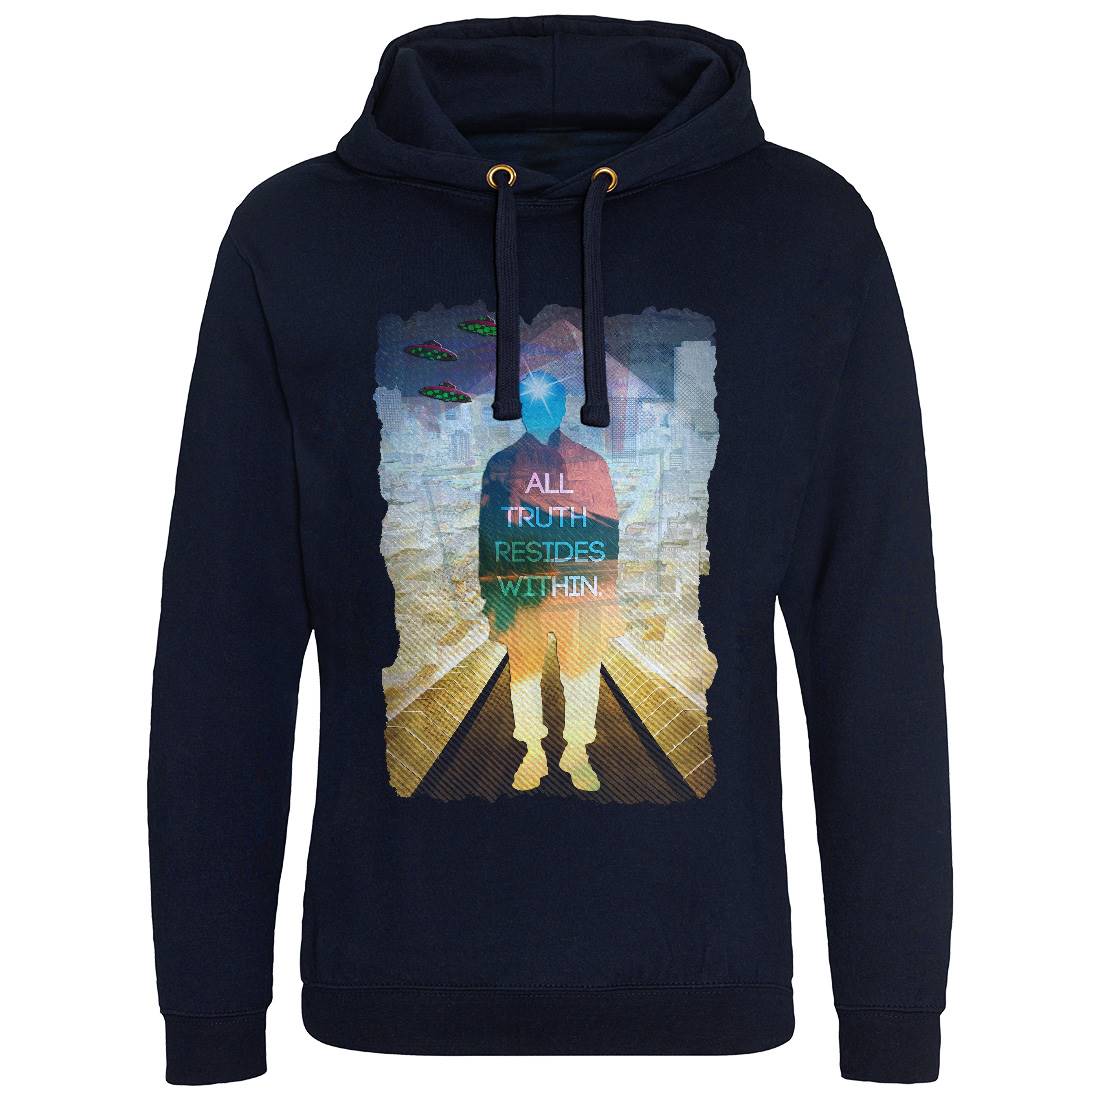 Within Mens Hoodie Without Pocket Illuminati A942